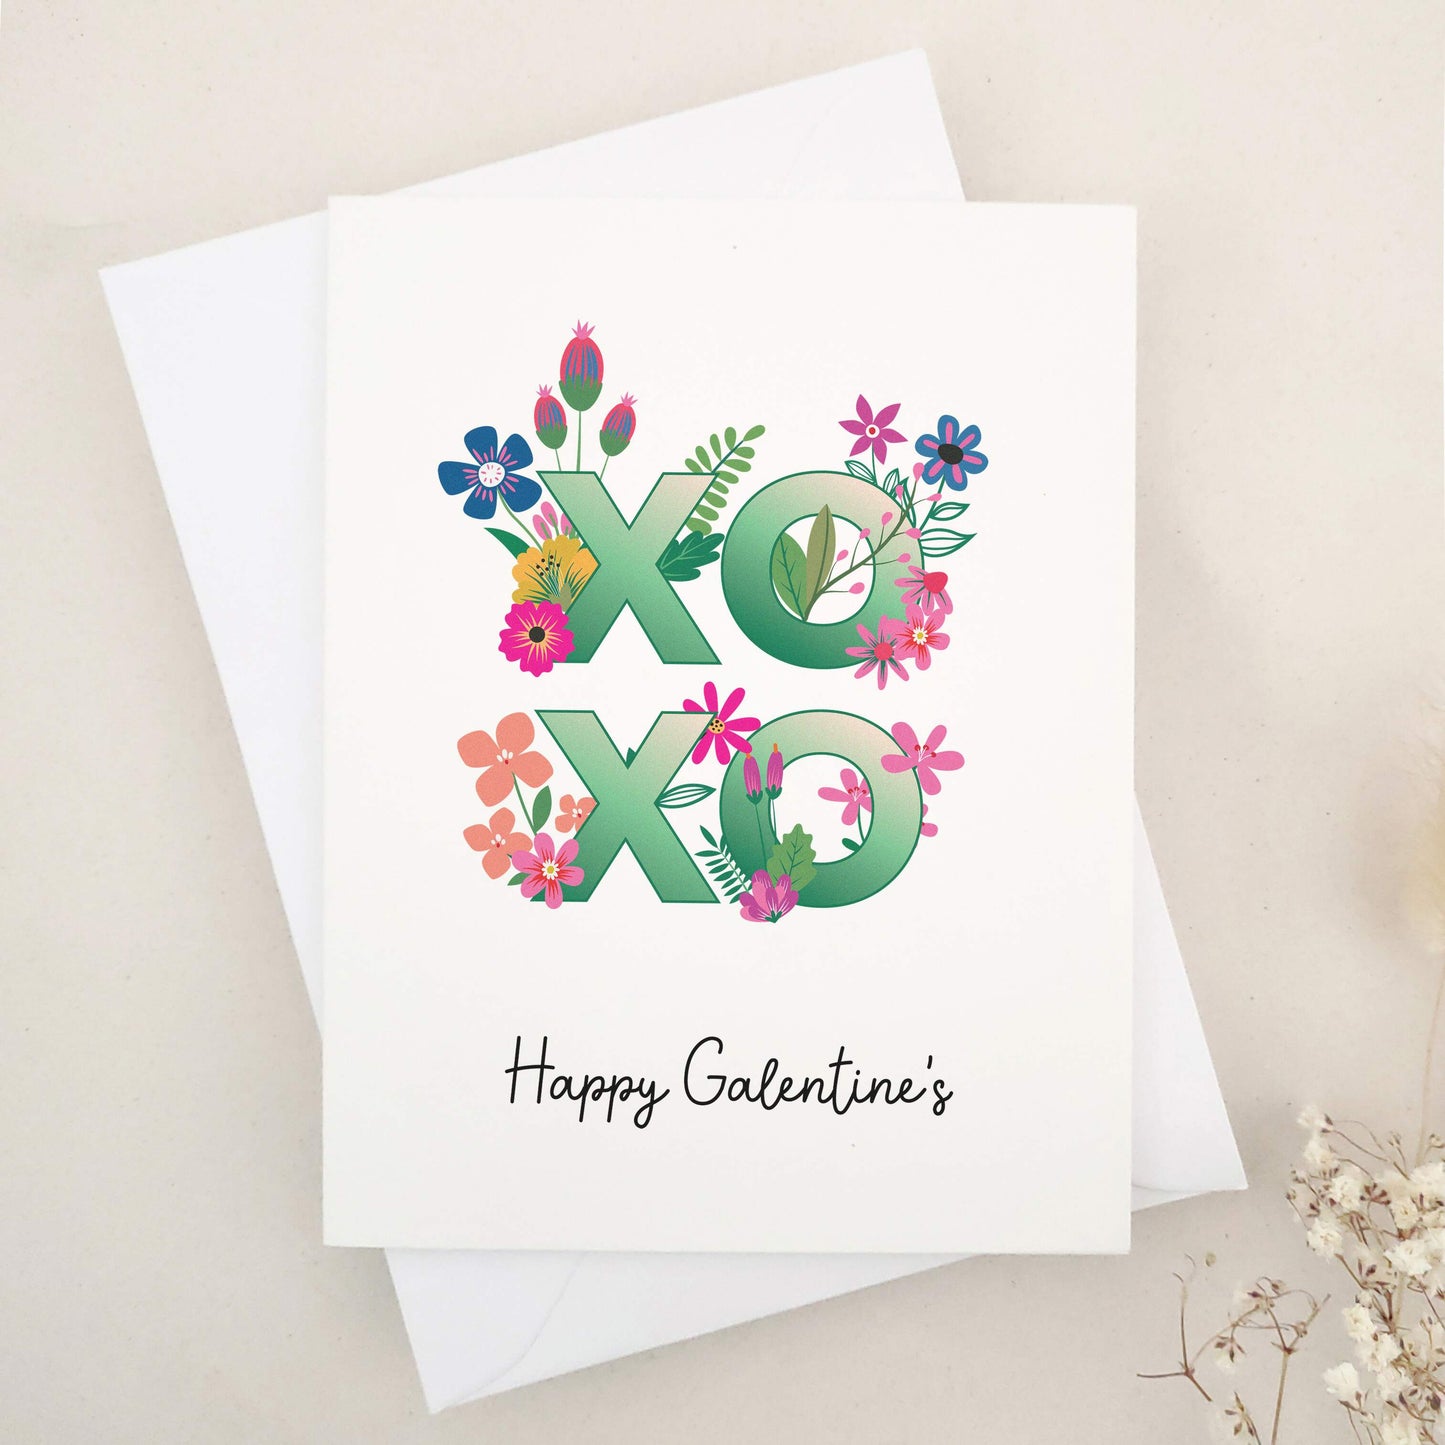 Celebrate this Valentine's Day with our gorgeous Happy Galentine's cards, perfect for showing love and appreciation to your bestie, friends, and sister. The design features a vibrant blend of flowers, bold typography, and elegant calligraphy-style 'Happy Galentine's' print.